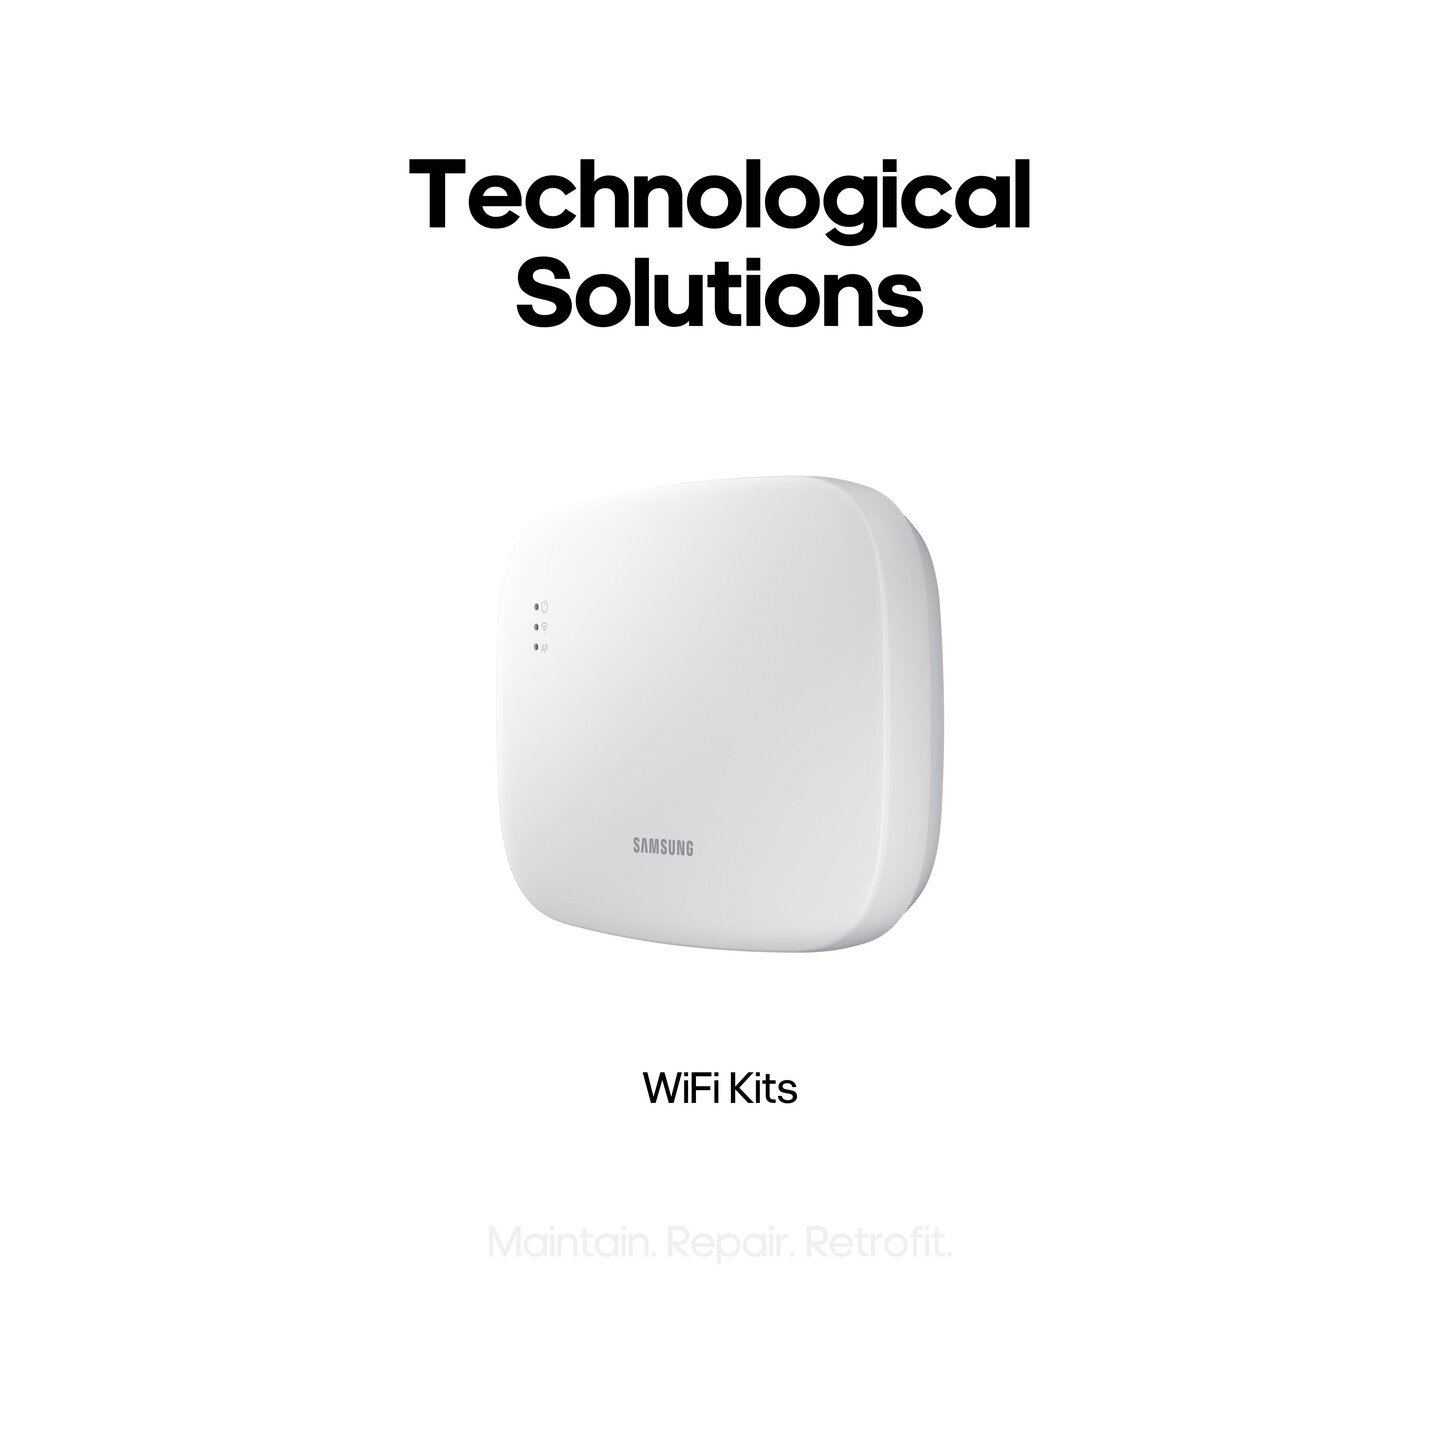 Take control of your indoor units from anywhere with the Samsung Wifi Kit! This innovative device allows you to manage your HVAC system from your mobile device, making it easy to adjust temperatures and settings no matter where you are. Upgrade to a 